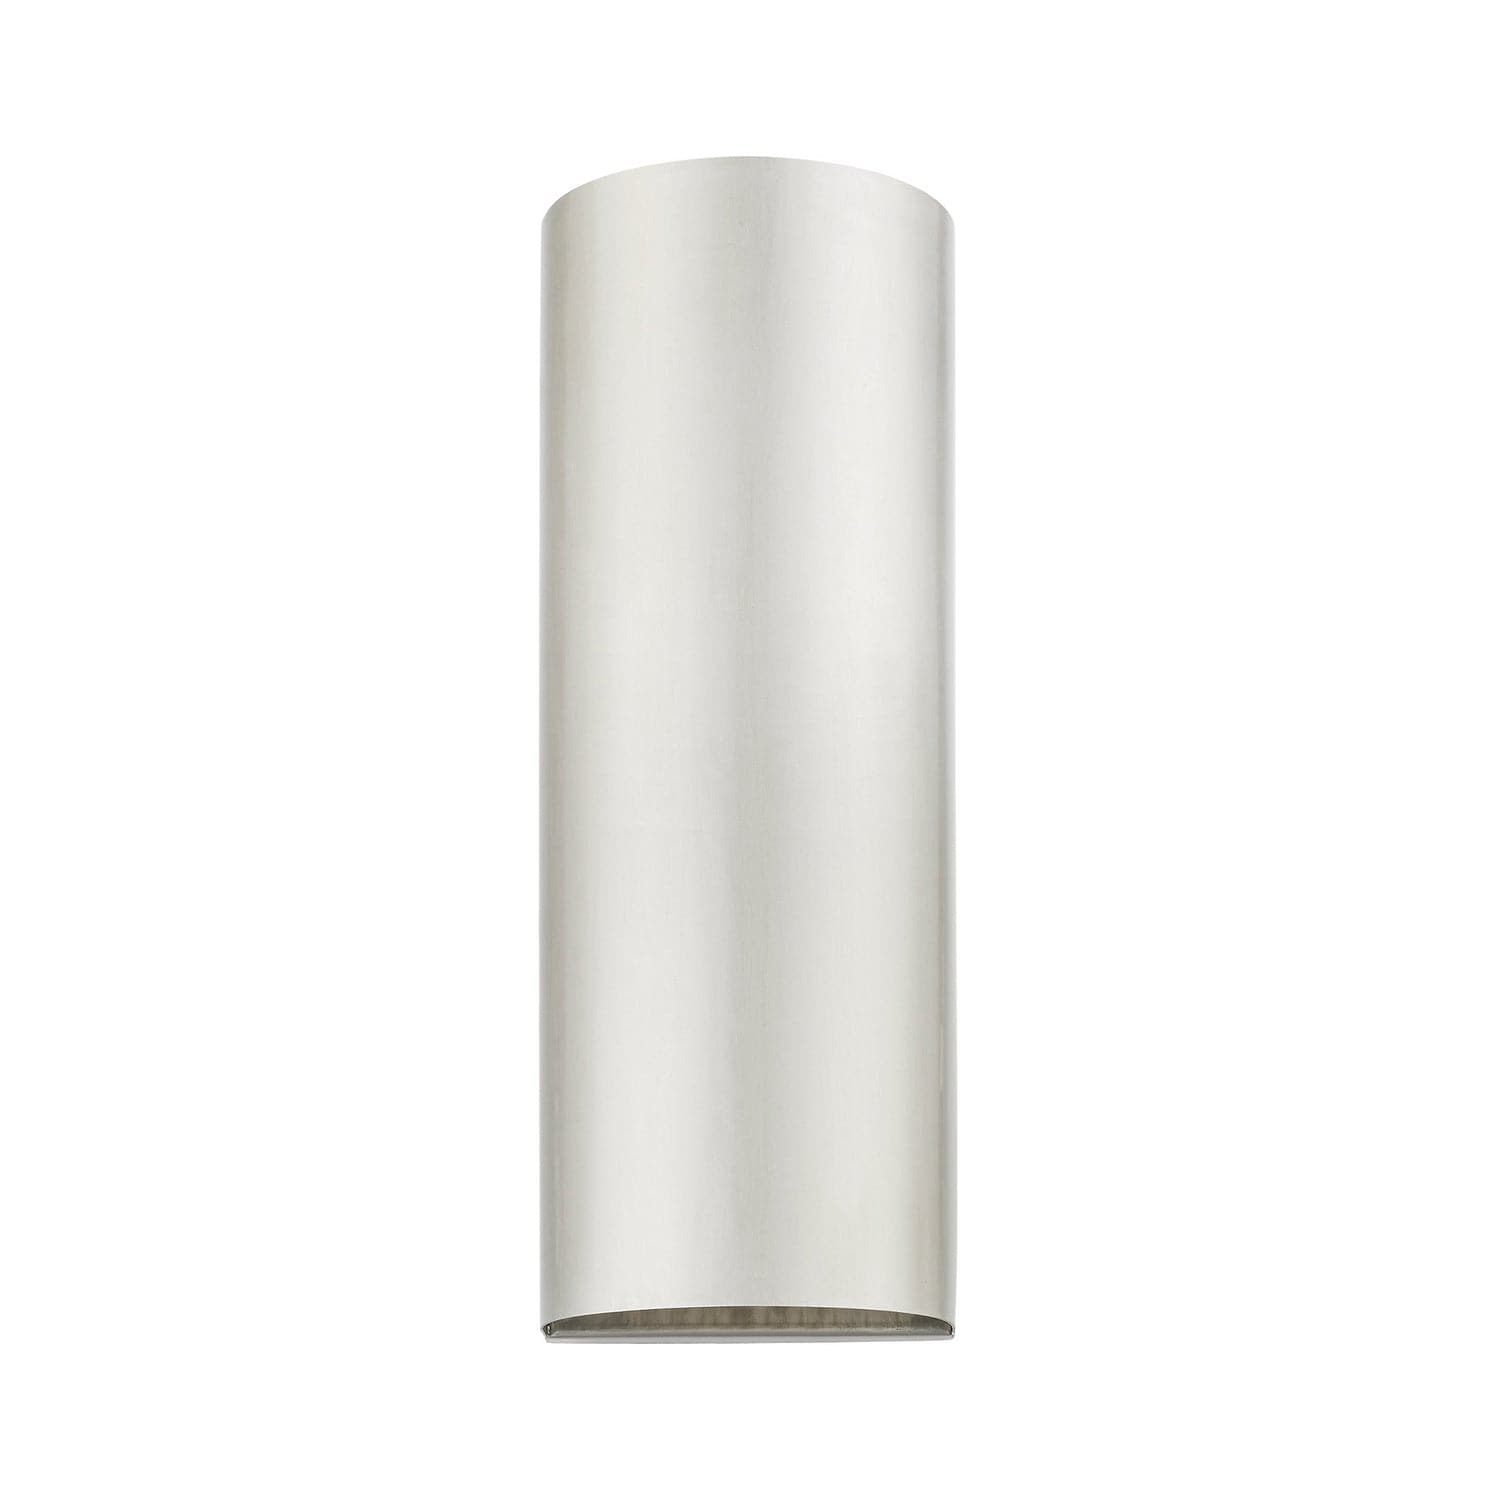 Livex Lighting - 22063-91 - One Light Outdoor Wall Sconce - Bond - Brushed Nickel